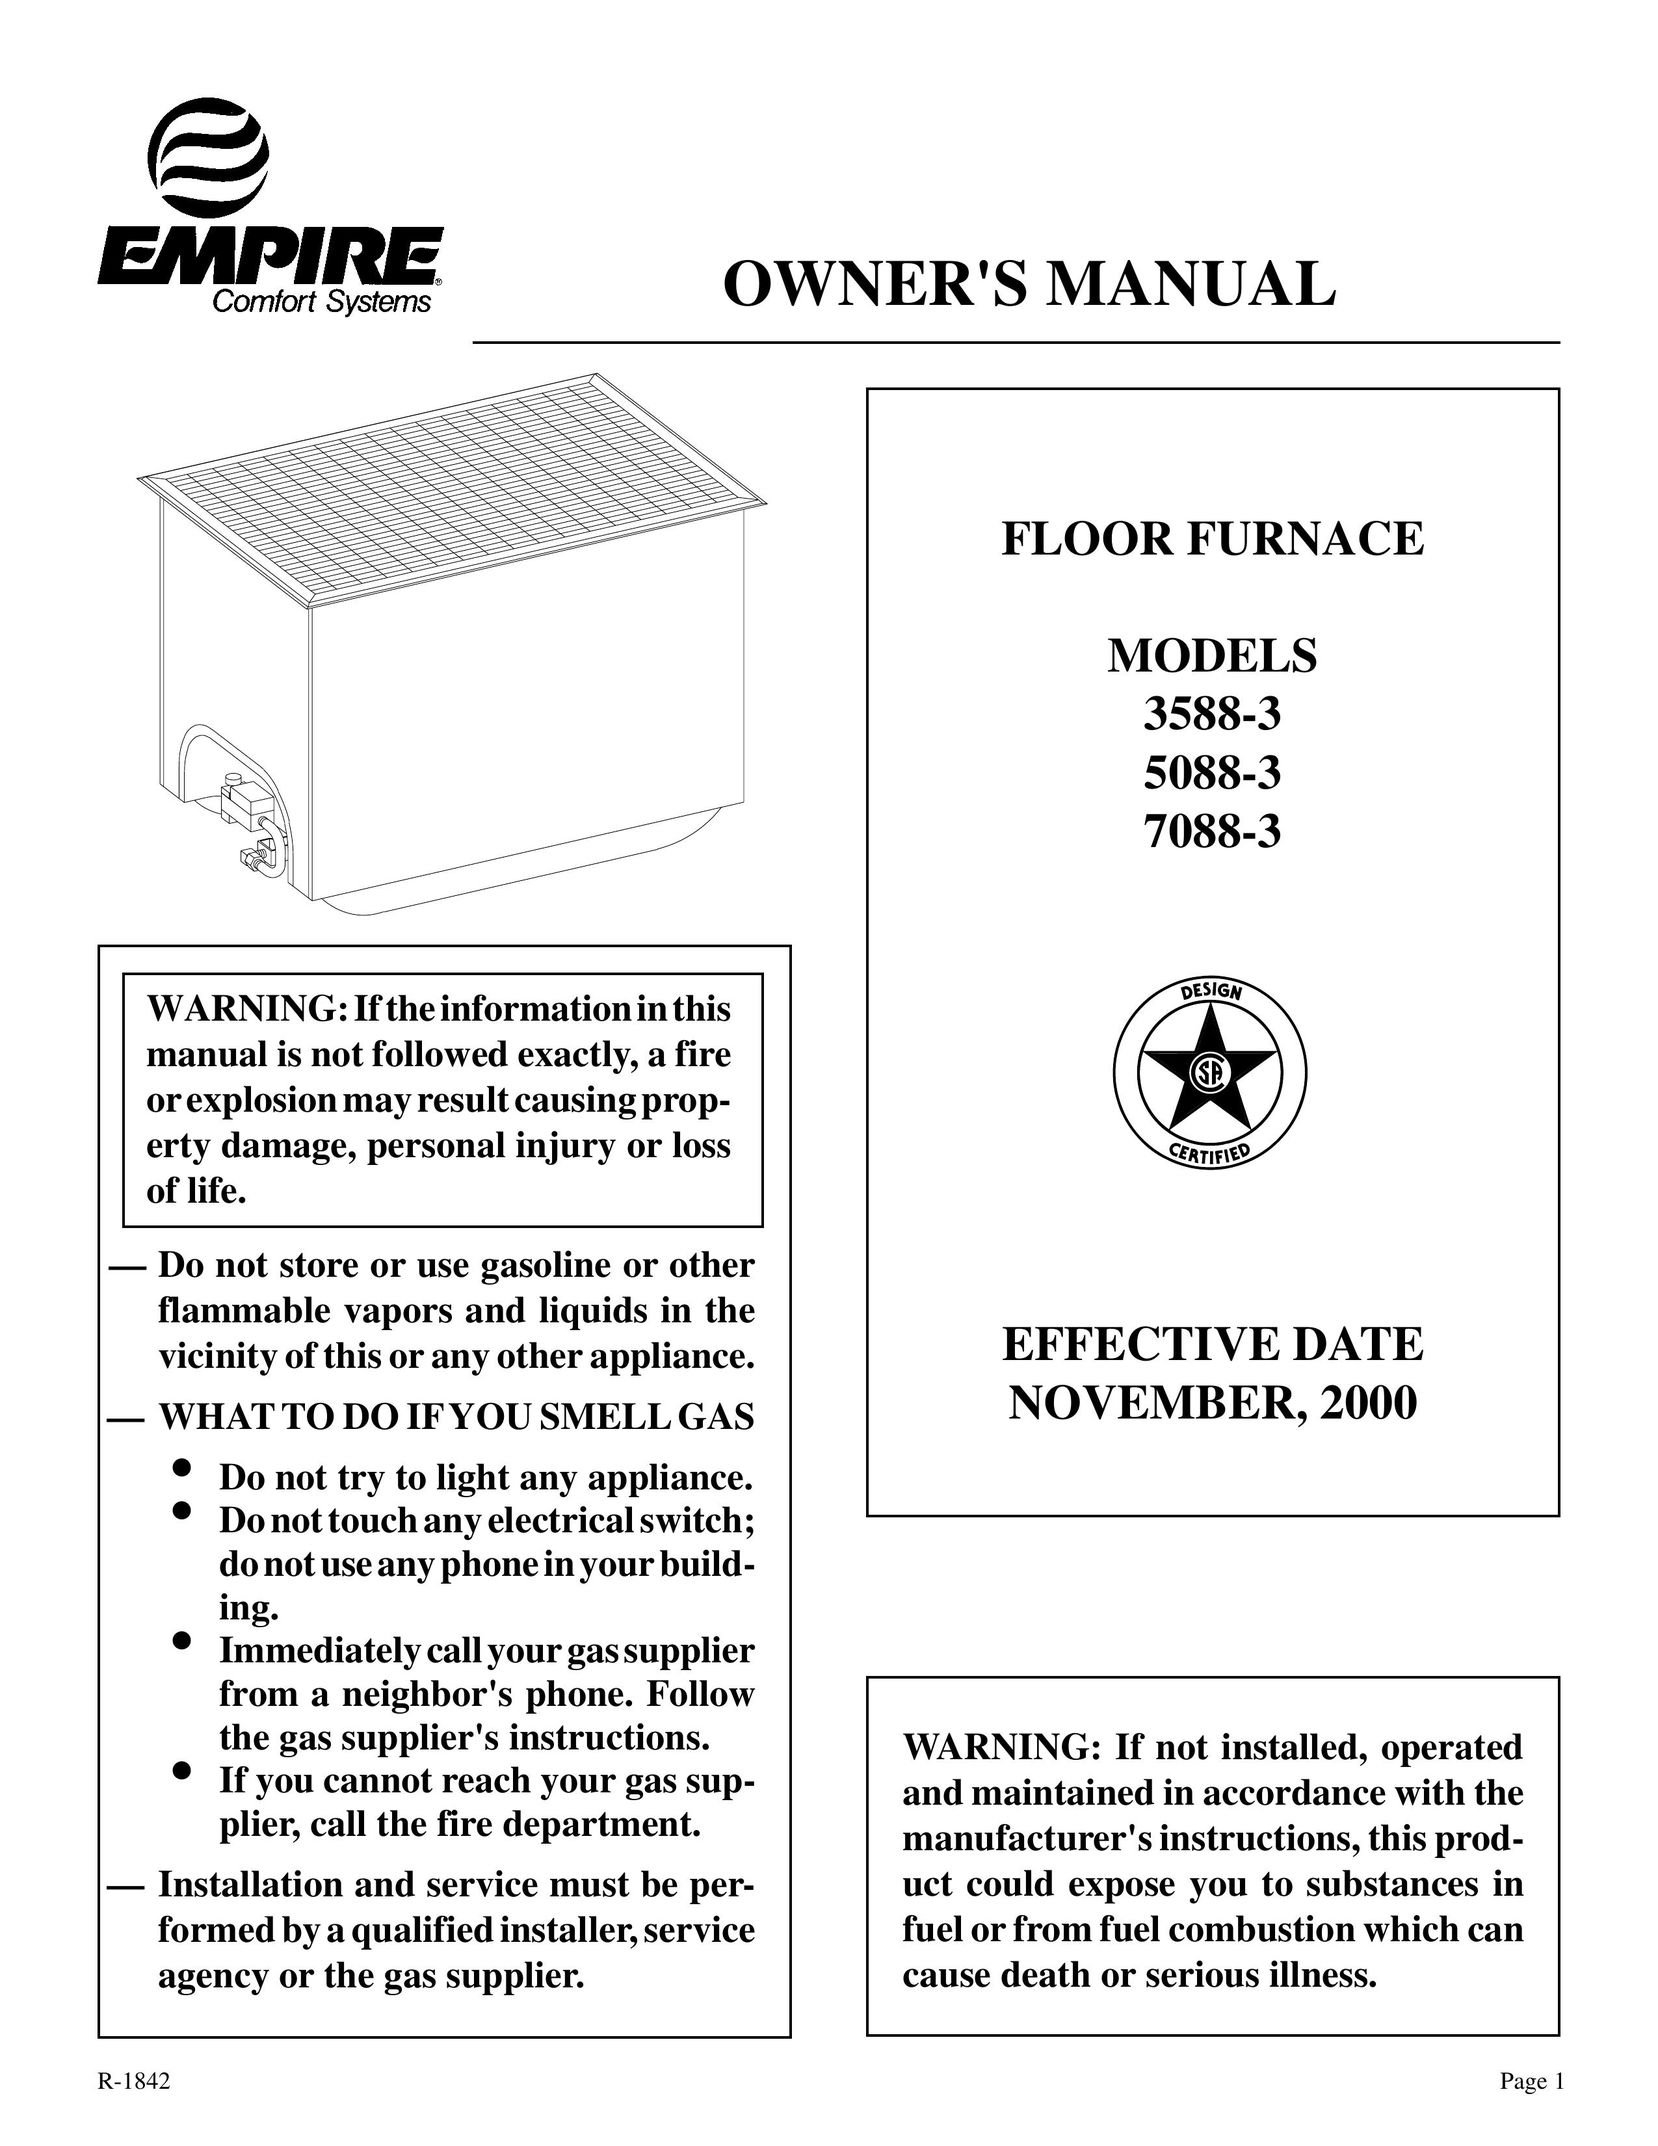 Empire Comfort Systems 3588-3 Furnace User Manual (Page 1)